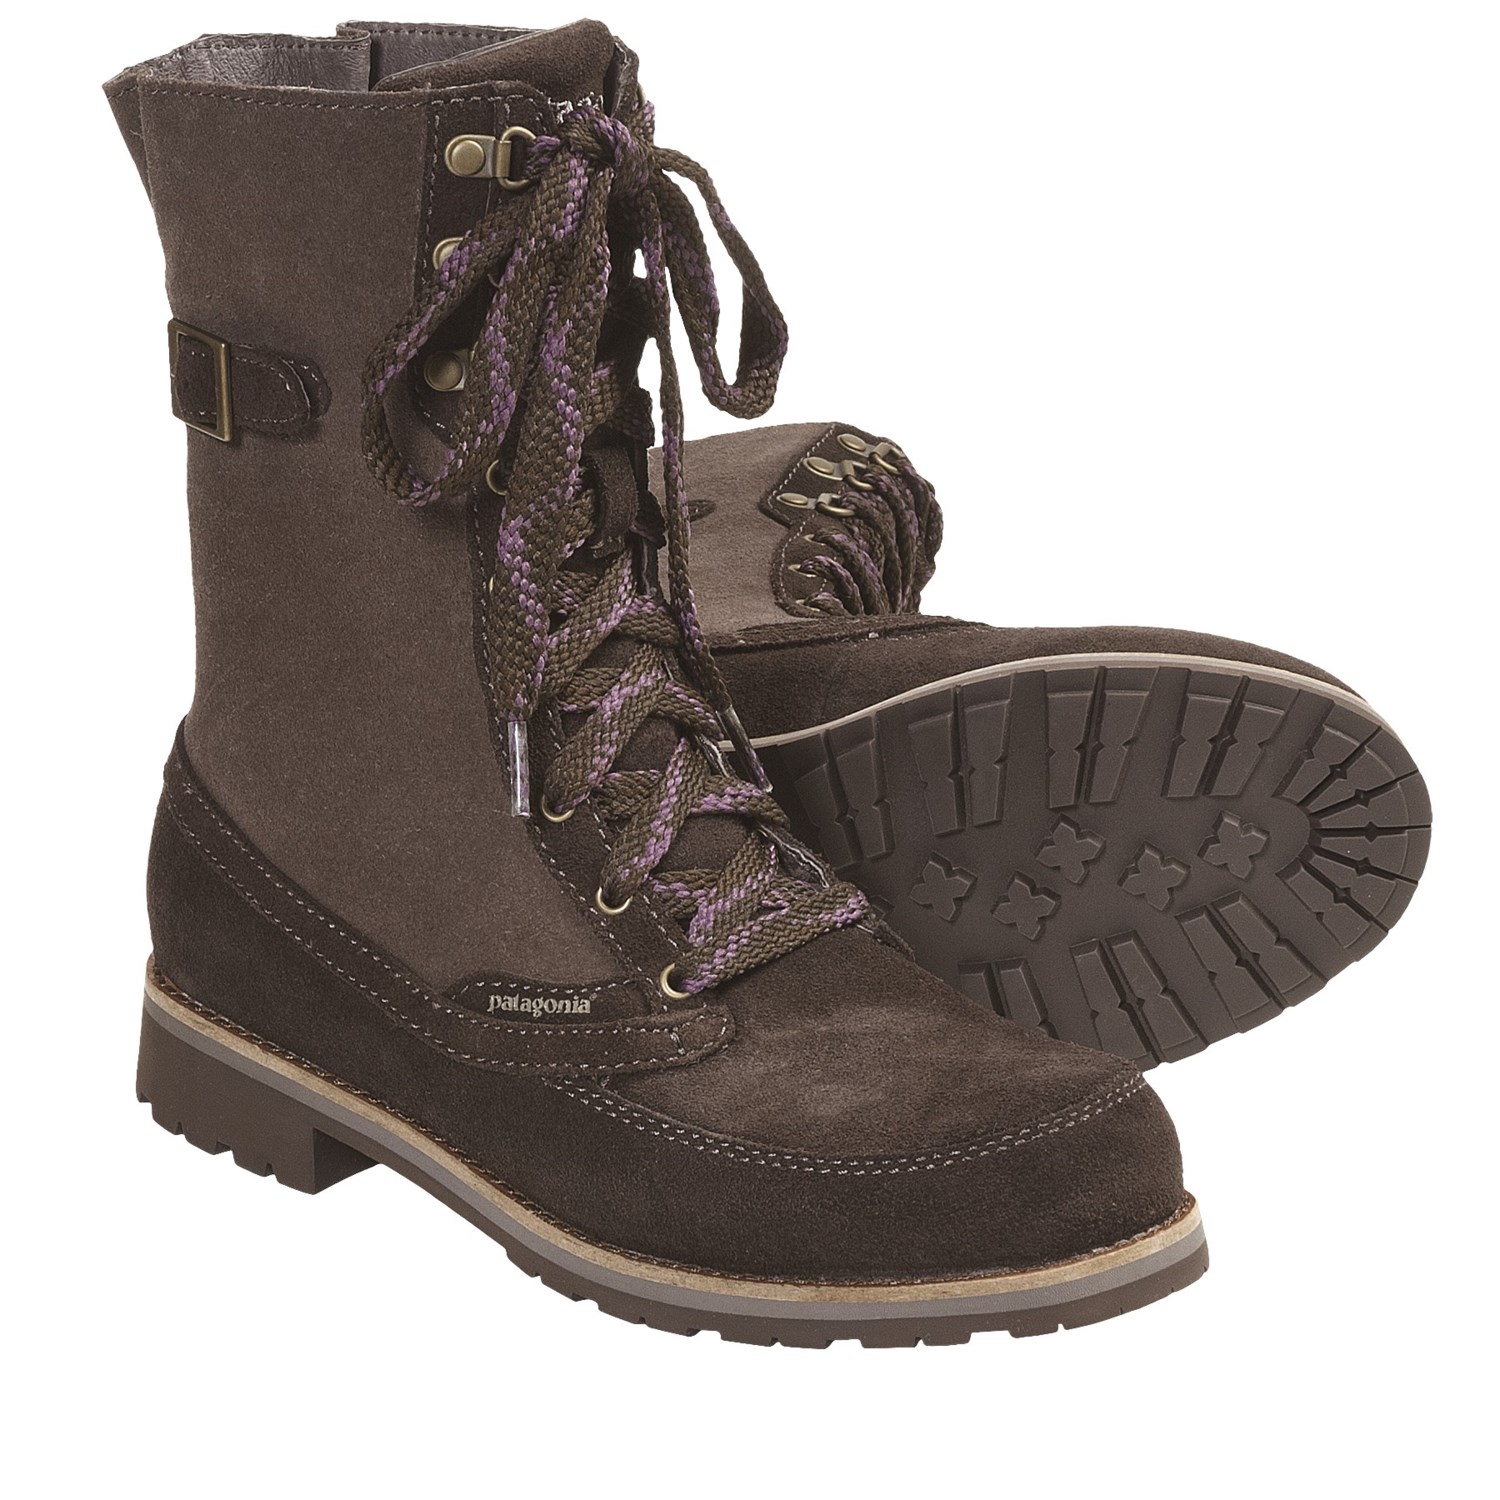 Patagonia Tin Shed Buckle Boots (For Women) in Espresso